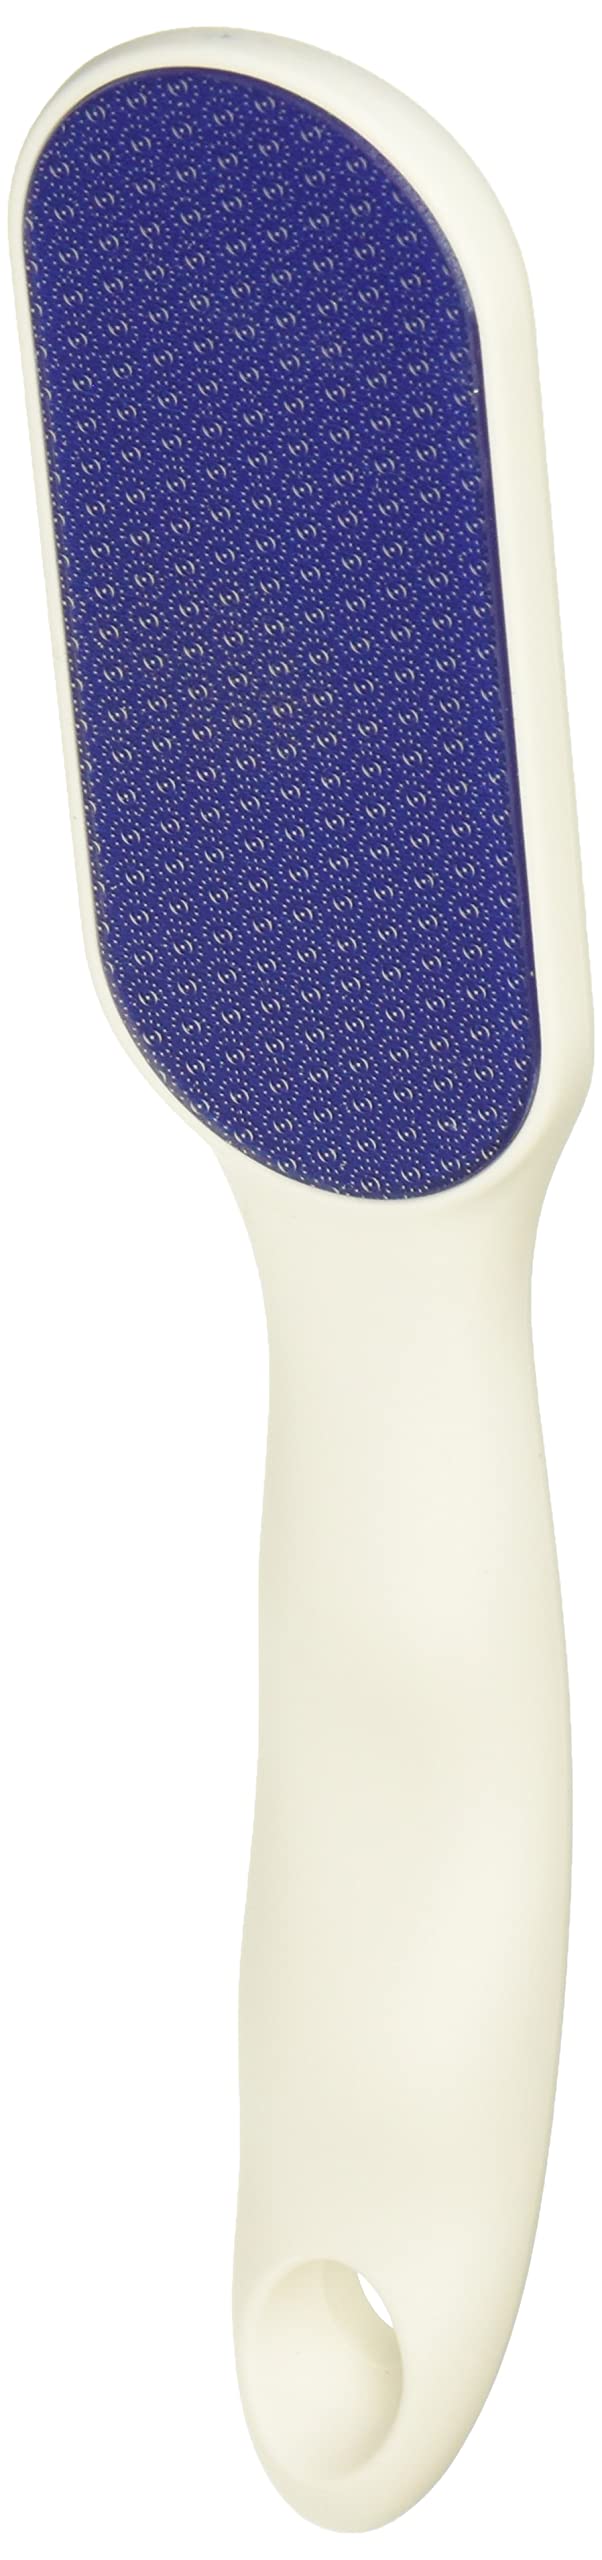 Dr. Scholl's Hard Skin Remover Nano Glass Foot File - Home of The